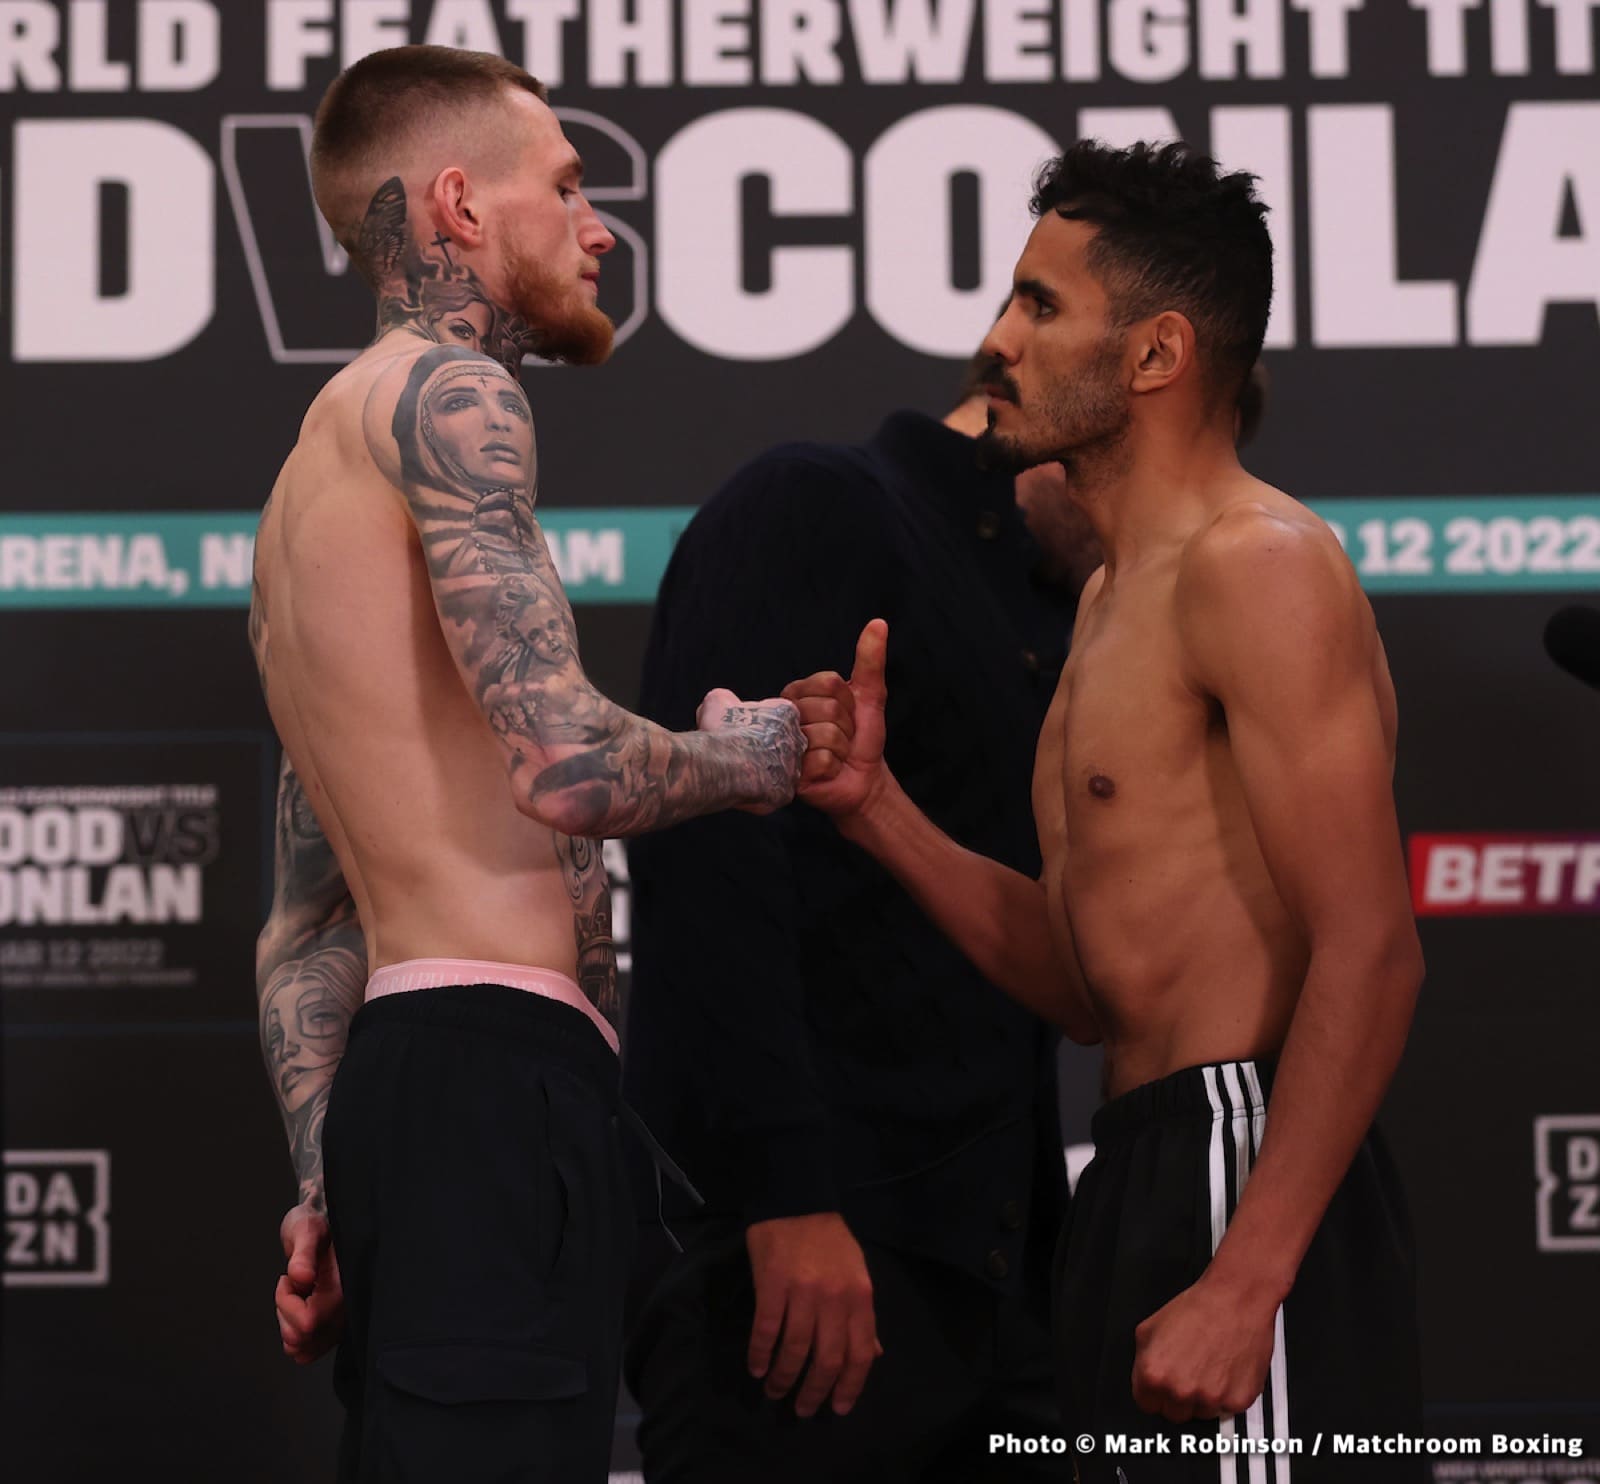 Image: Wood vs. Conlan - Official DAZN Weights & Photos